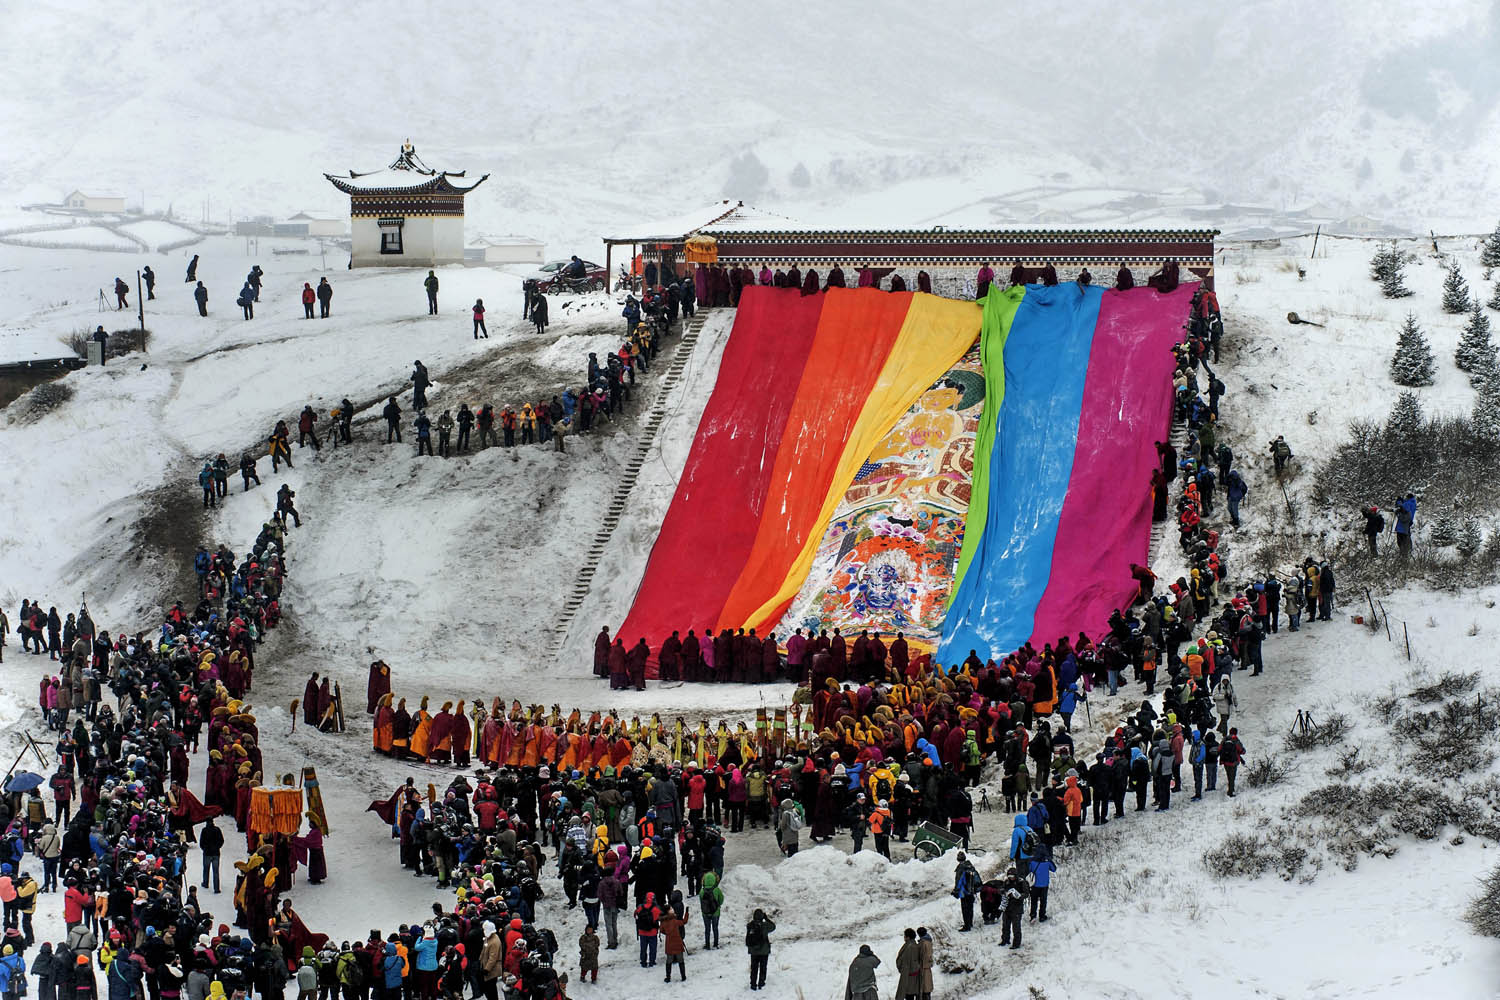 Feb. 12, 2014. Visitors and Tibetan monks look on as a giant thangka, a religious silk embroidery or painting displaying the Buddha portrait, is unveiled amid snowfalls at Langmu Lamasery in Gannan Tibetan Autonomous Prefecture, Gansu province.